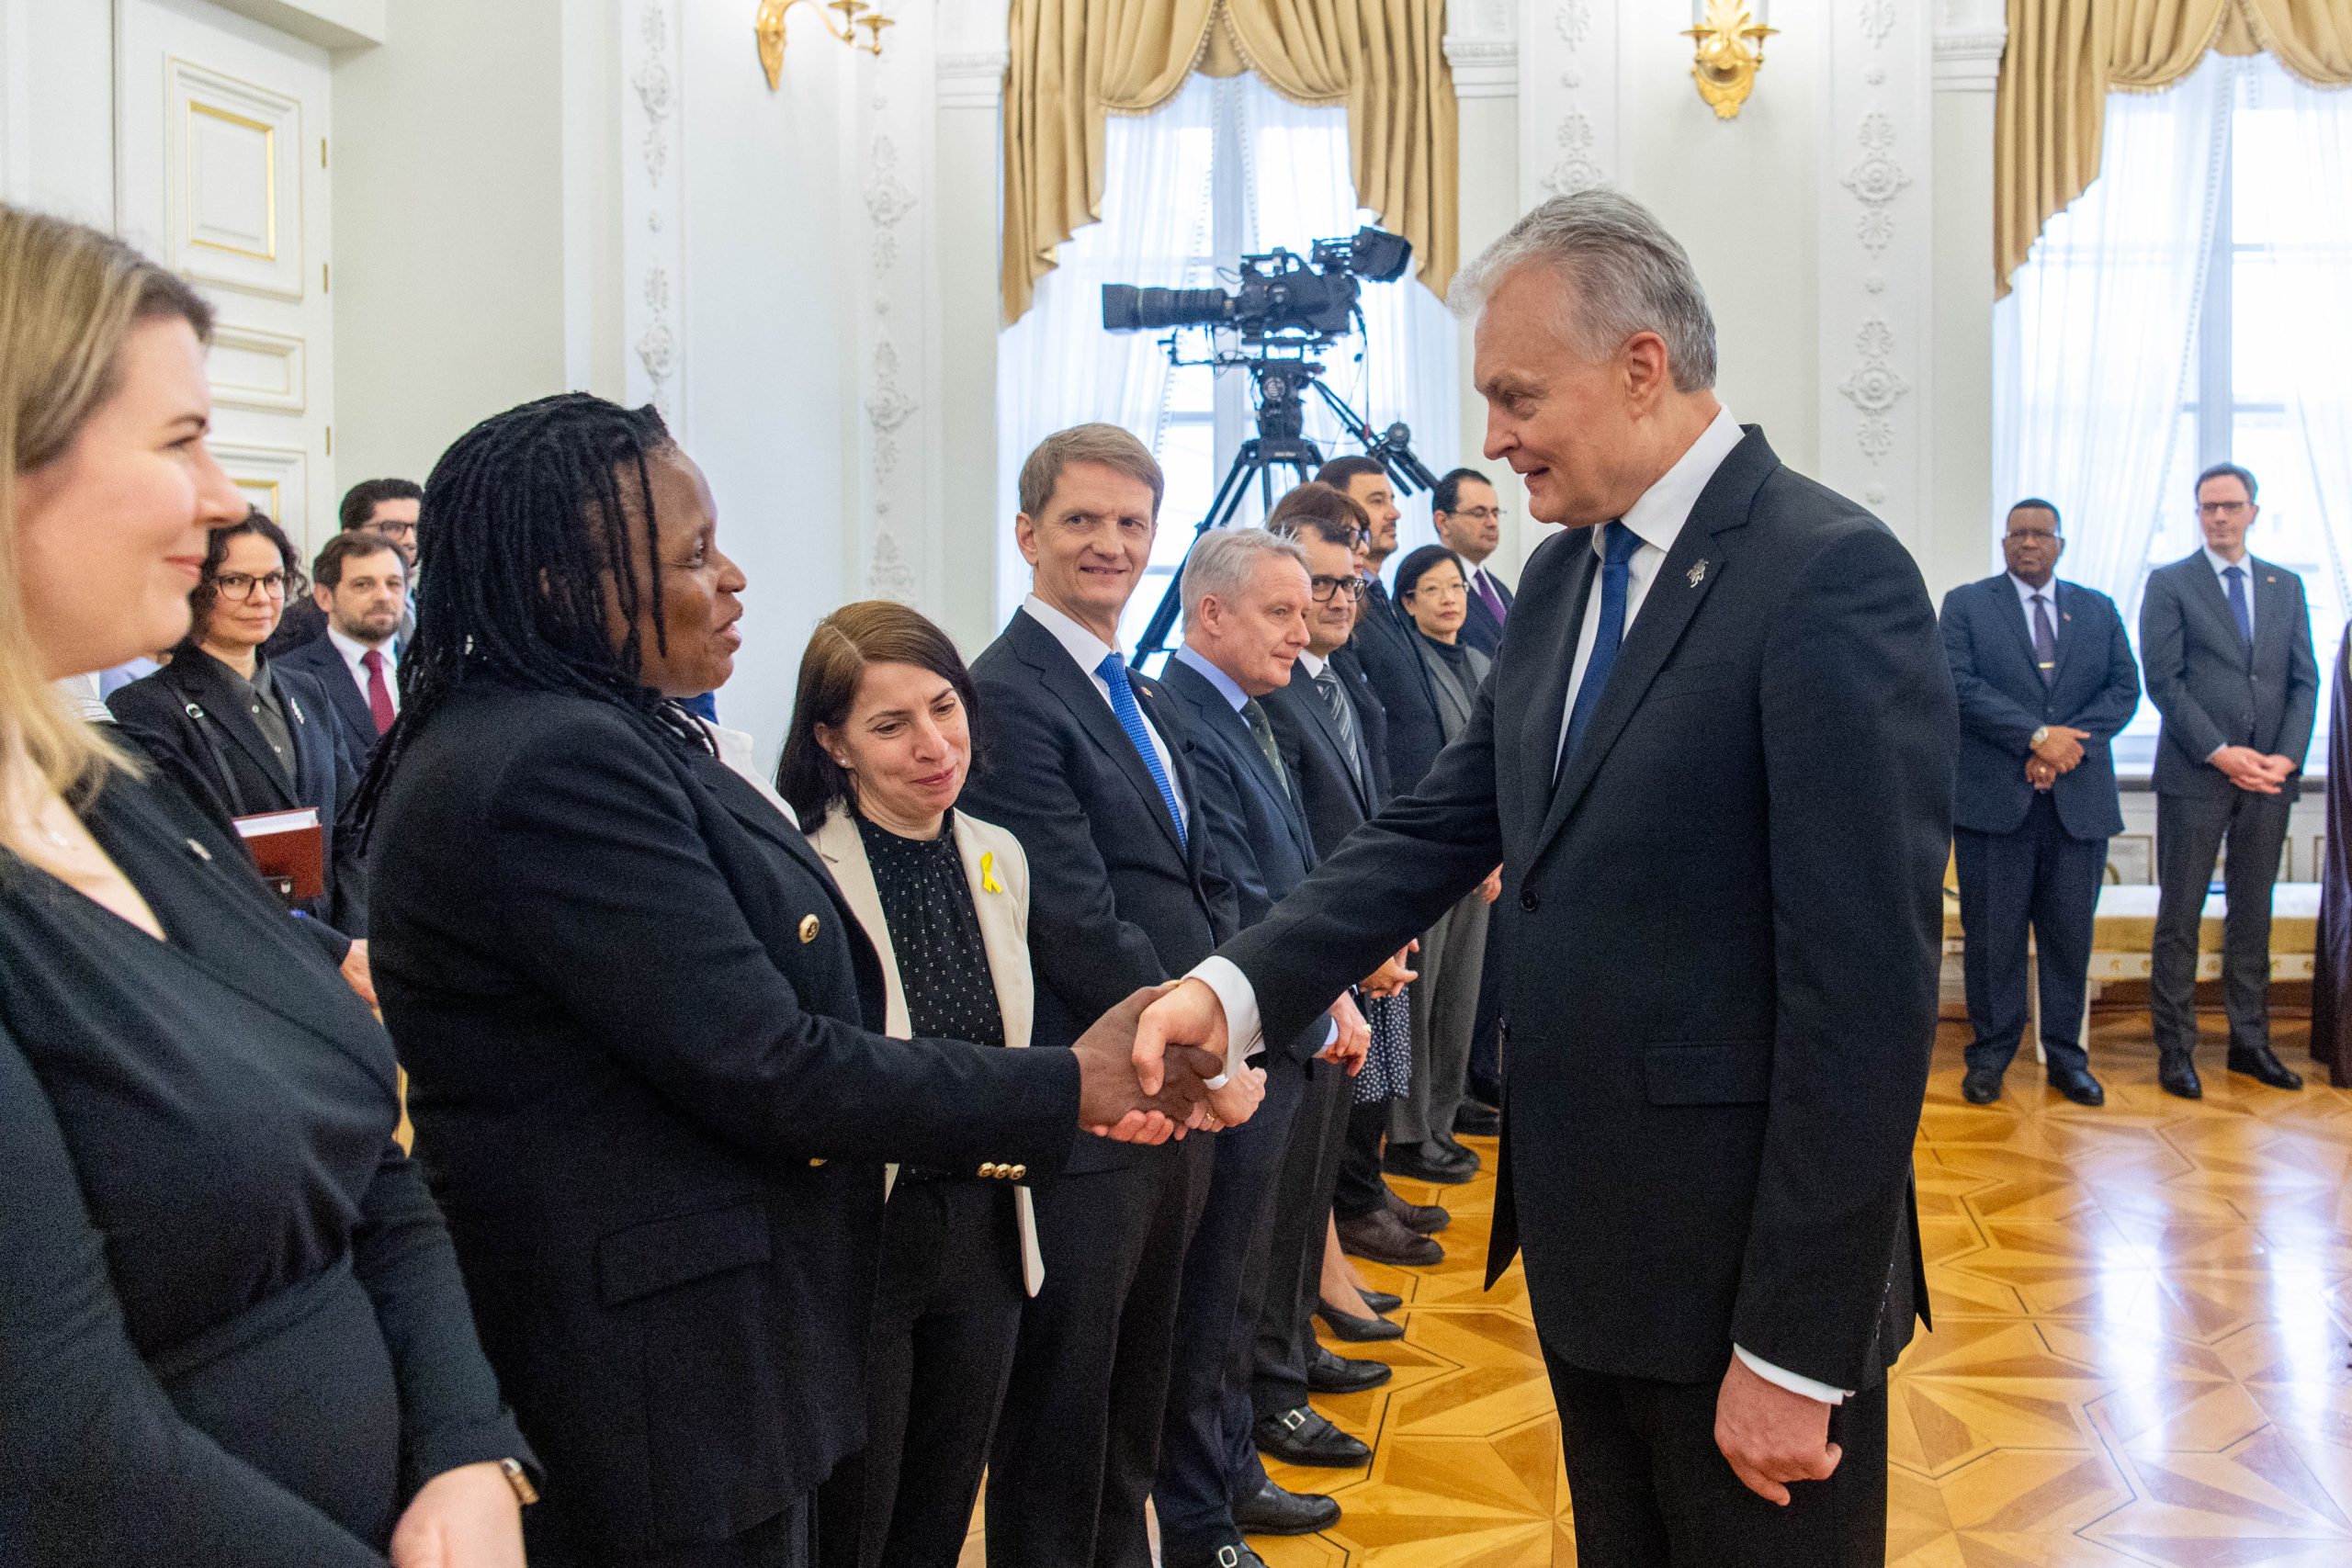 Her excellency Ambassador Priscilla Misihairabwi-Mushonga’s visit to Lithuania